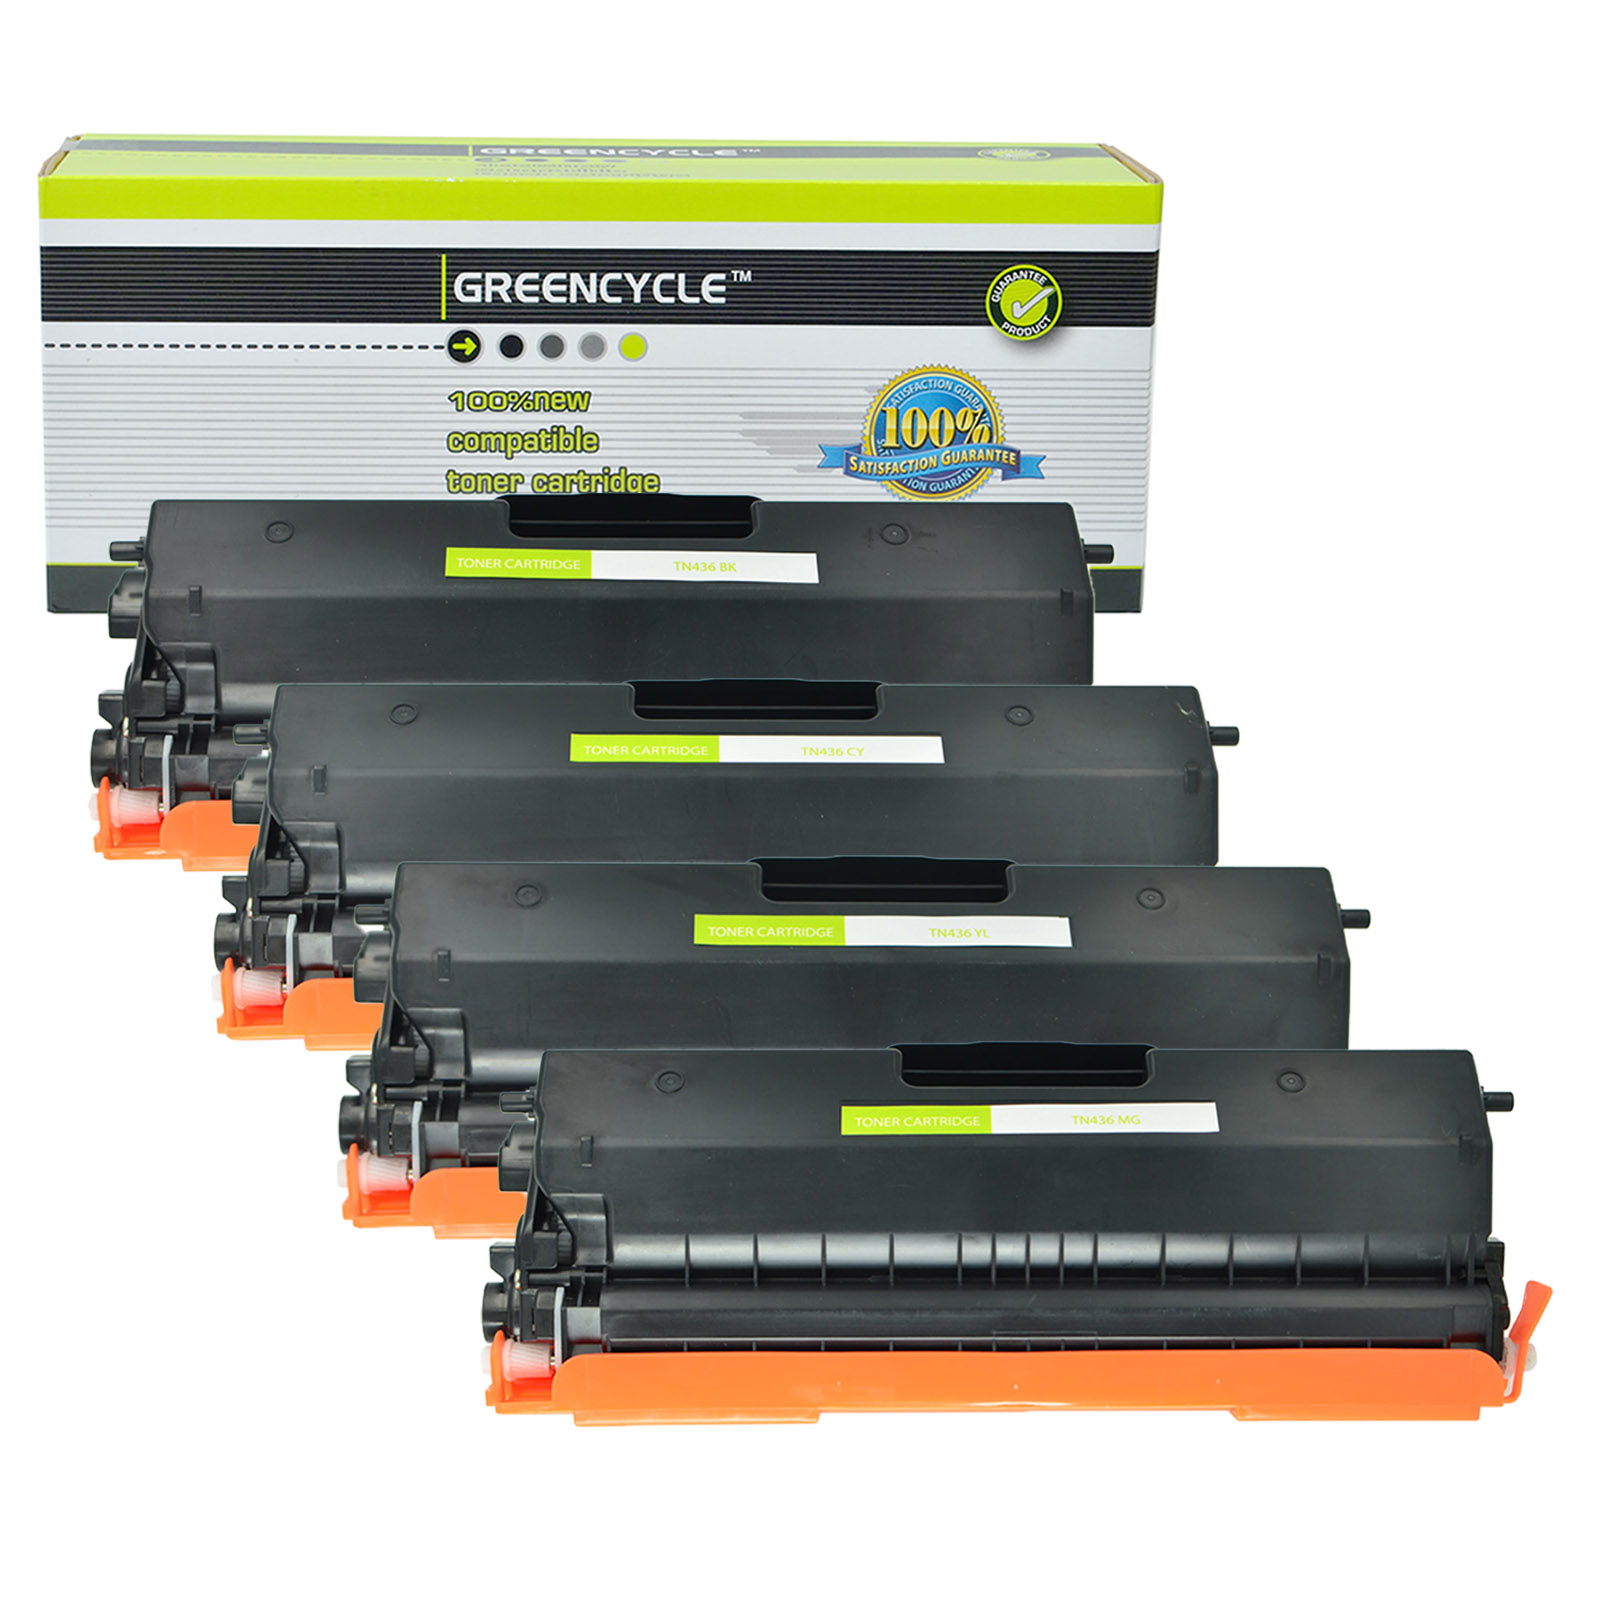 GREENCYCLE Compatible Brother TN436 (1 Black 1 Cyan 1 Yellow 1 Magenta) Toner Cartridge Set High Yield for HL-L8360CDW Printer